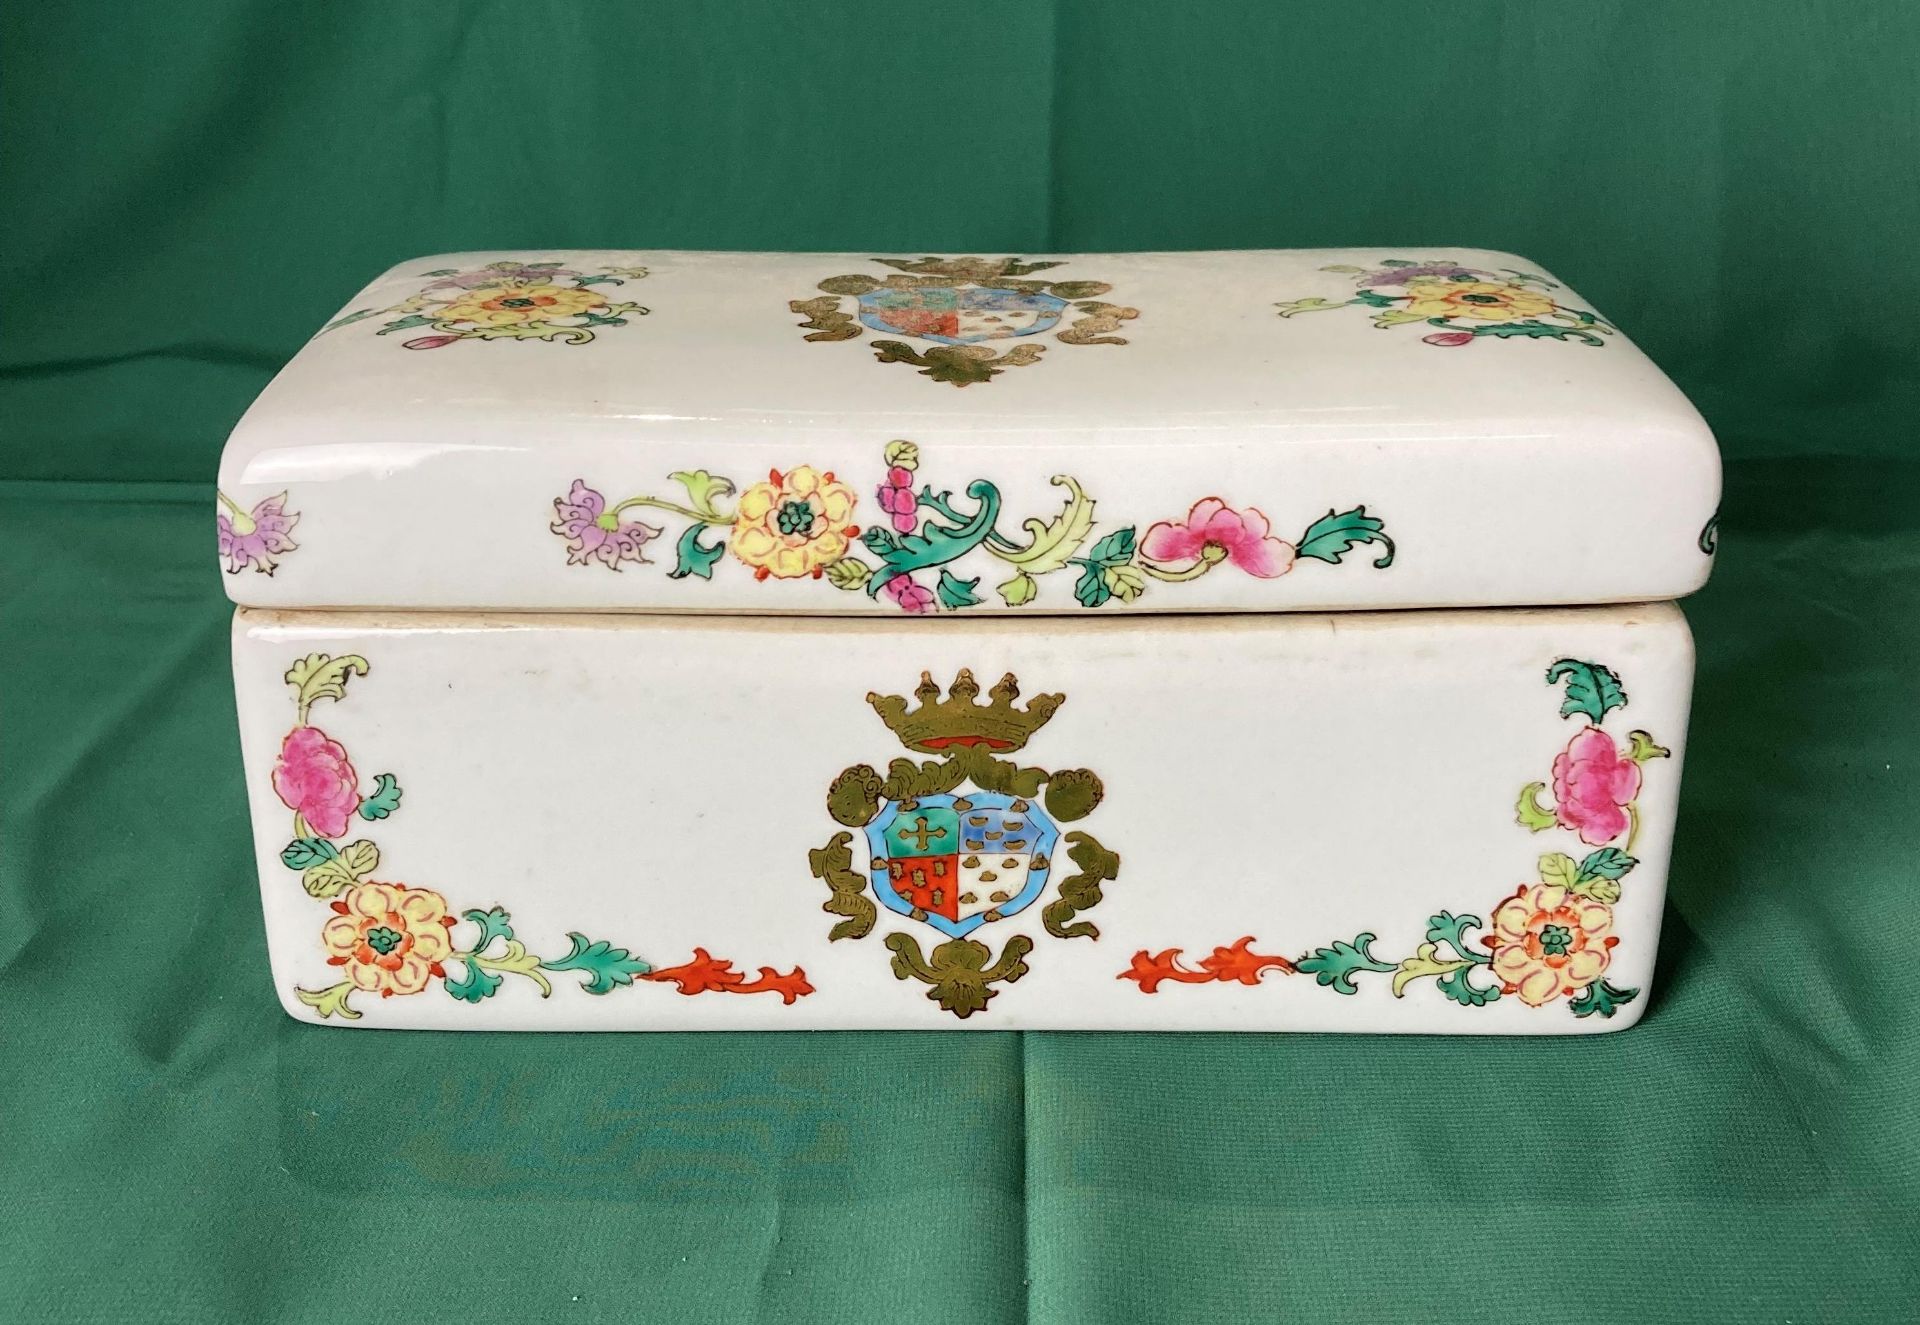 A vintage porcelain hand-painted box with Coat of Arms emblem and floral design,